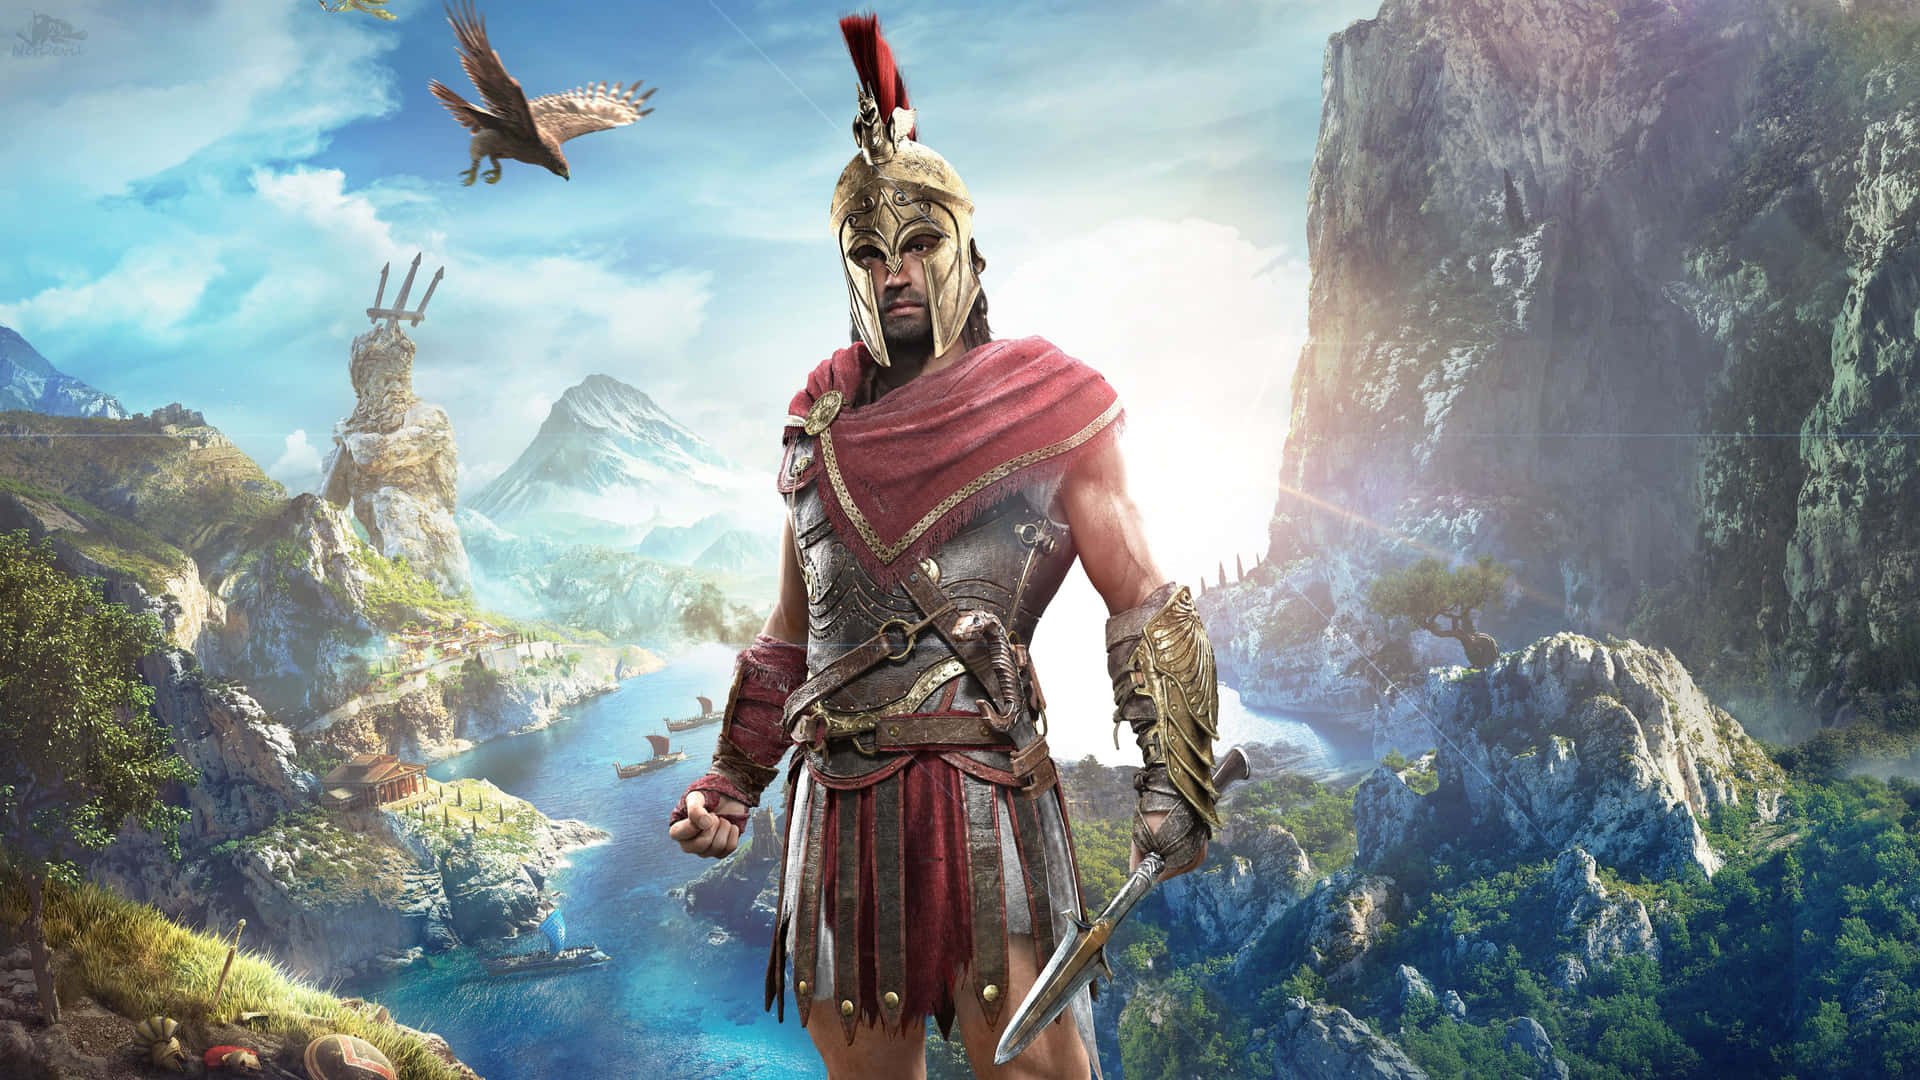 Fierce Alexios in action, experiencing the power of Assassin's Creed Odyssey Wallpaper